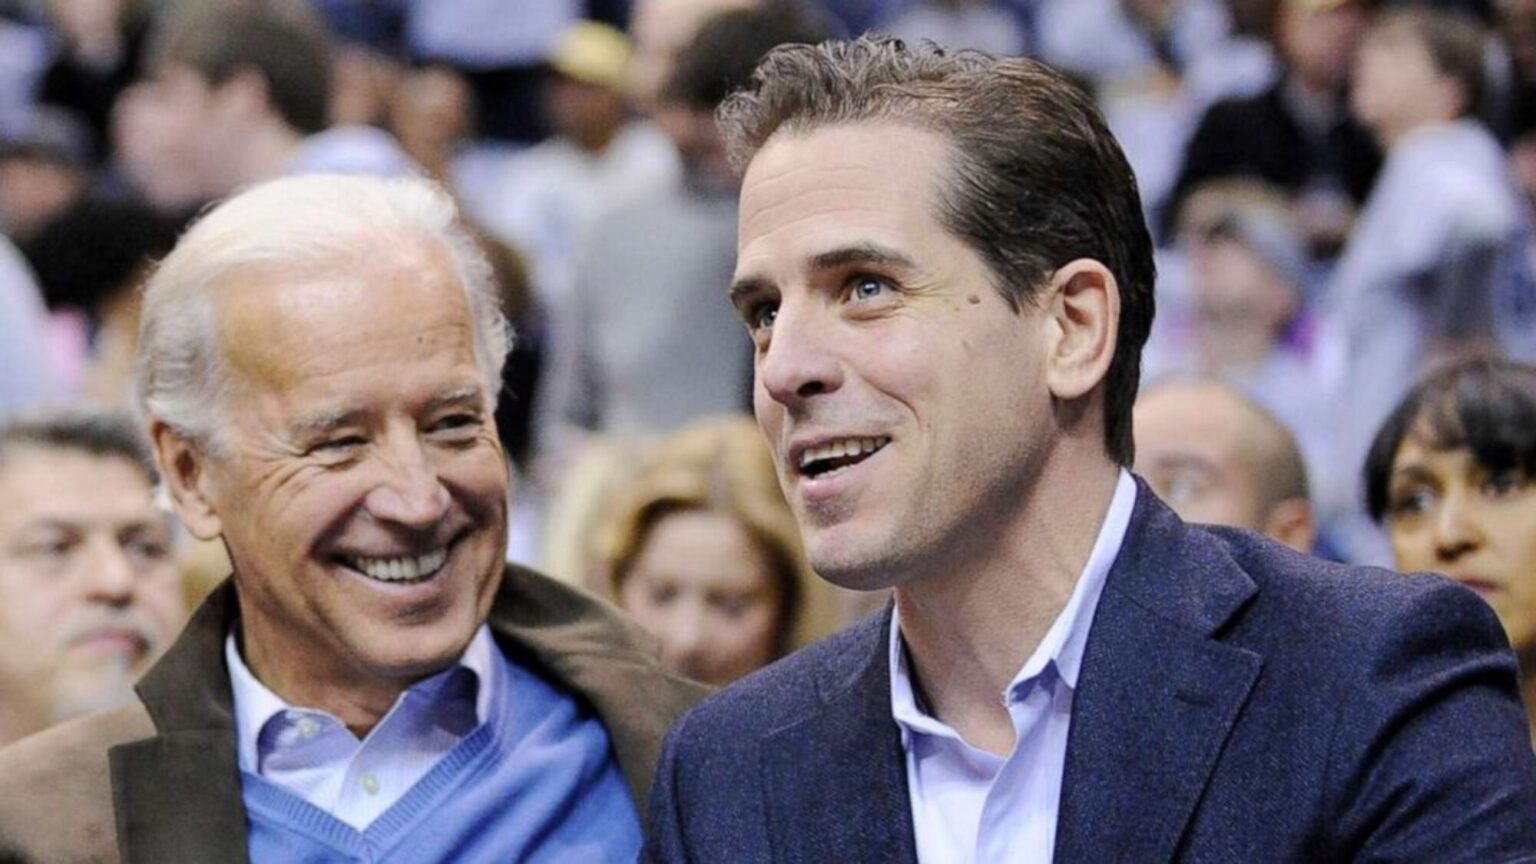 It seems that controversy and news surrounding Hunter Biden and Ukraine is far from over. Could he still be lying about what's happened?q